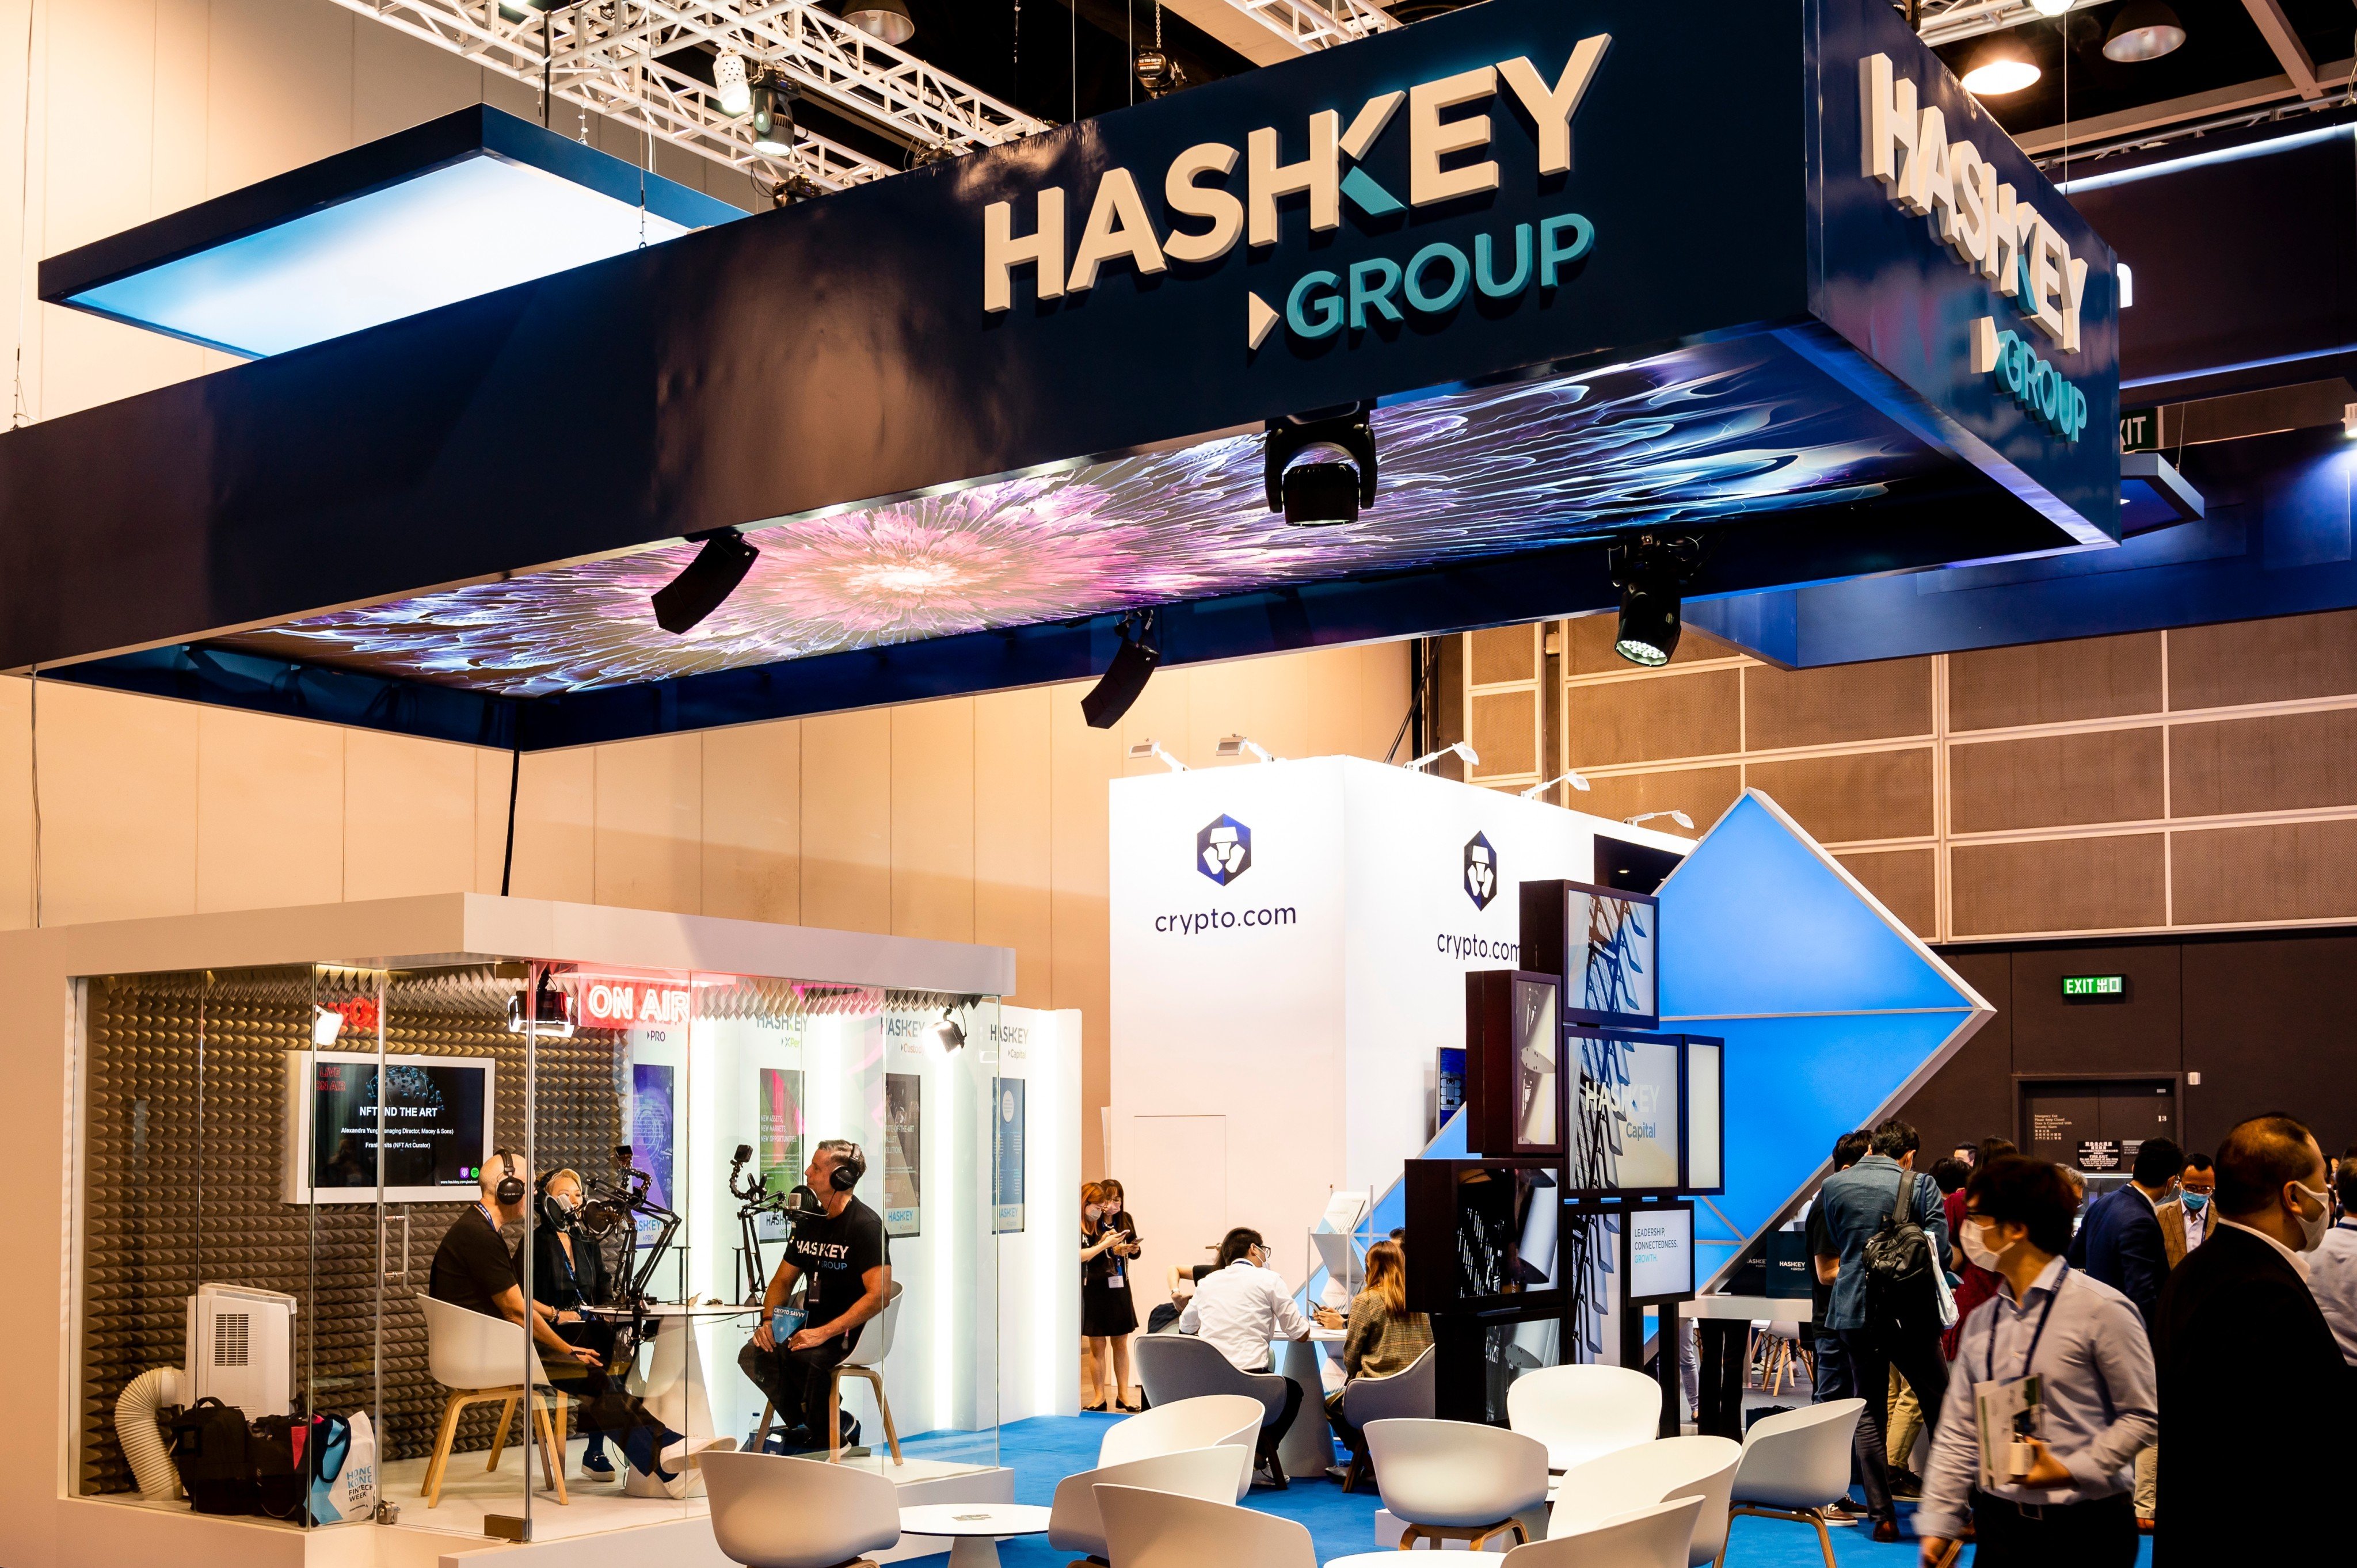 A view of HashKey Group’s booth during the 2021 Hong Kong FinTech Week at the Hong Kong Convention and Exhibition Centre on 3 November 2021. Photo: Shutterstock.